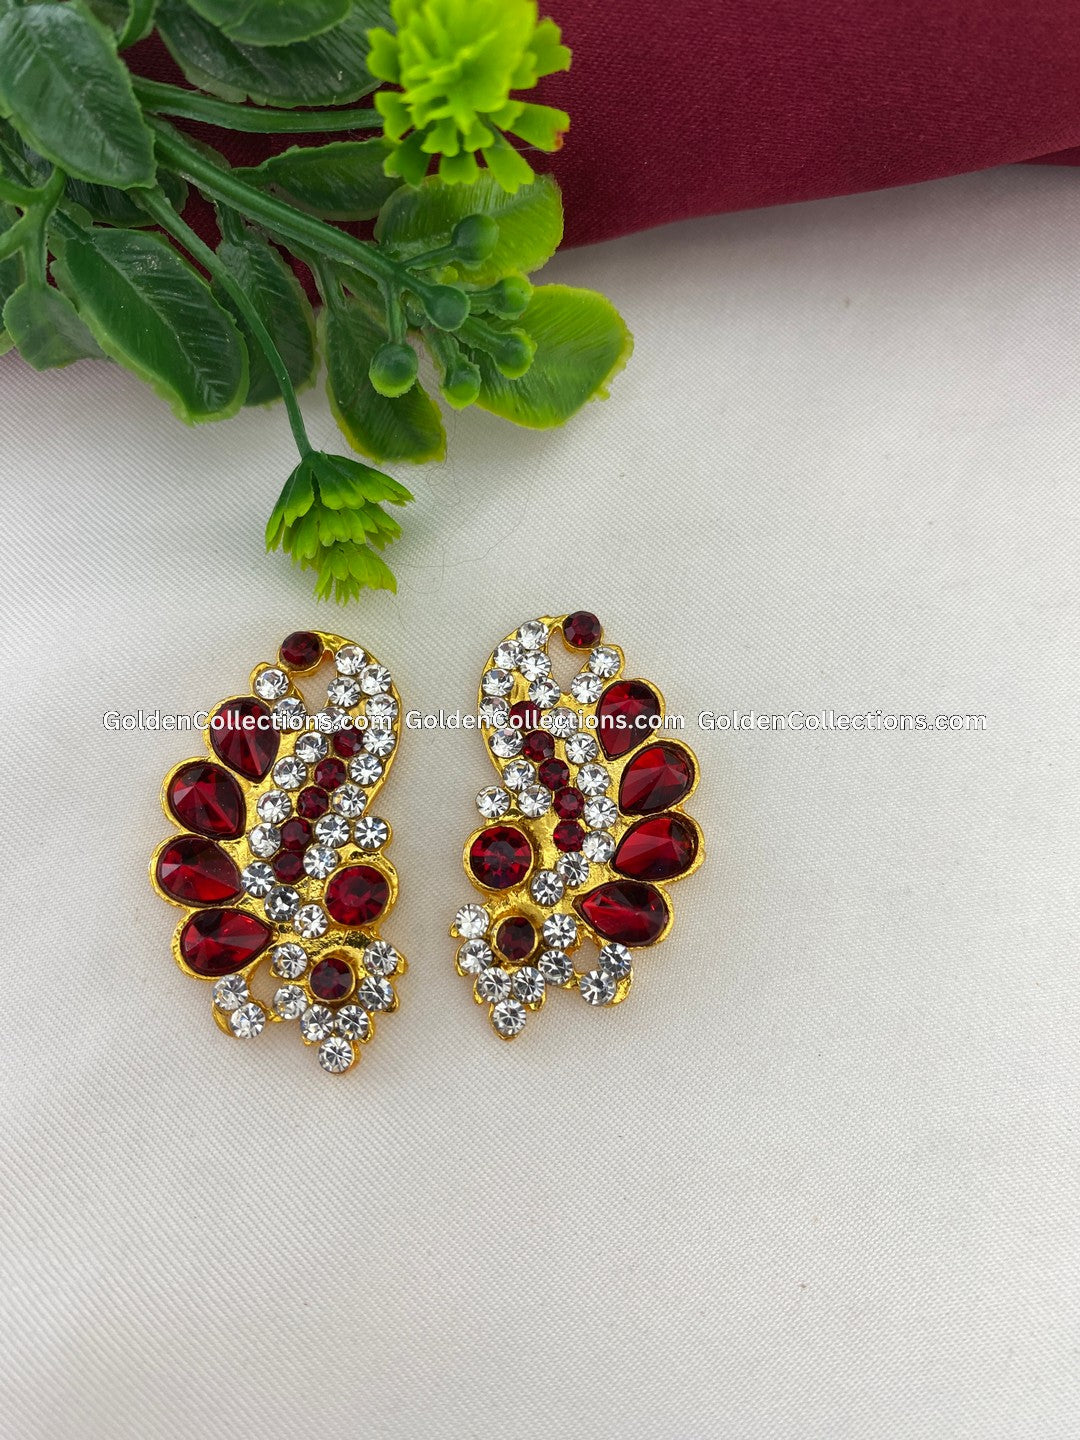 Ear Ornaments / Karna Patham for Hindu Statues - GoldenCollections DGE-026